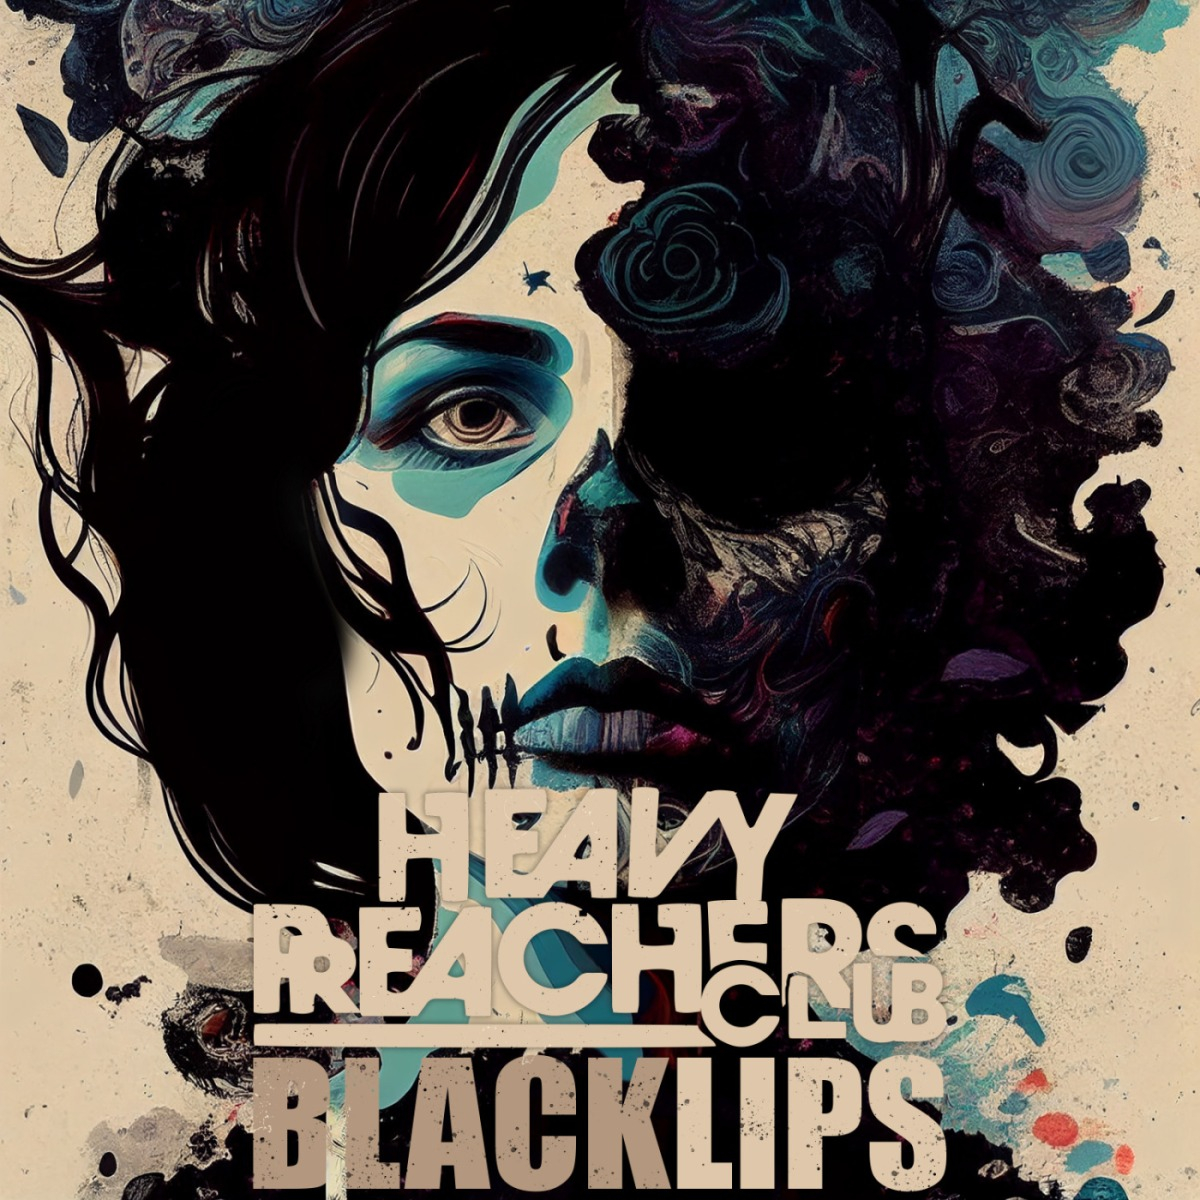 Black Lips by Heavy Preachers Club - Mastered By Ron Skinner